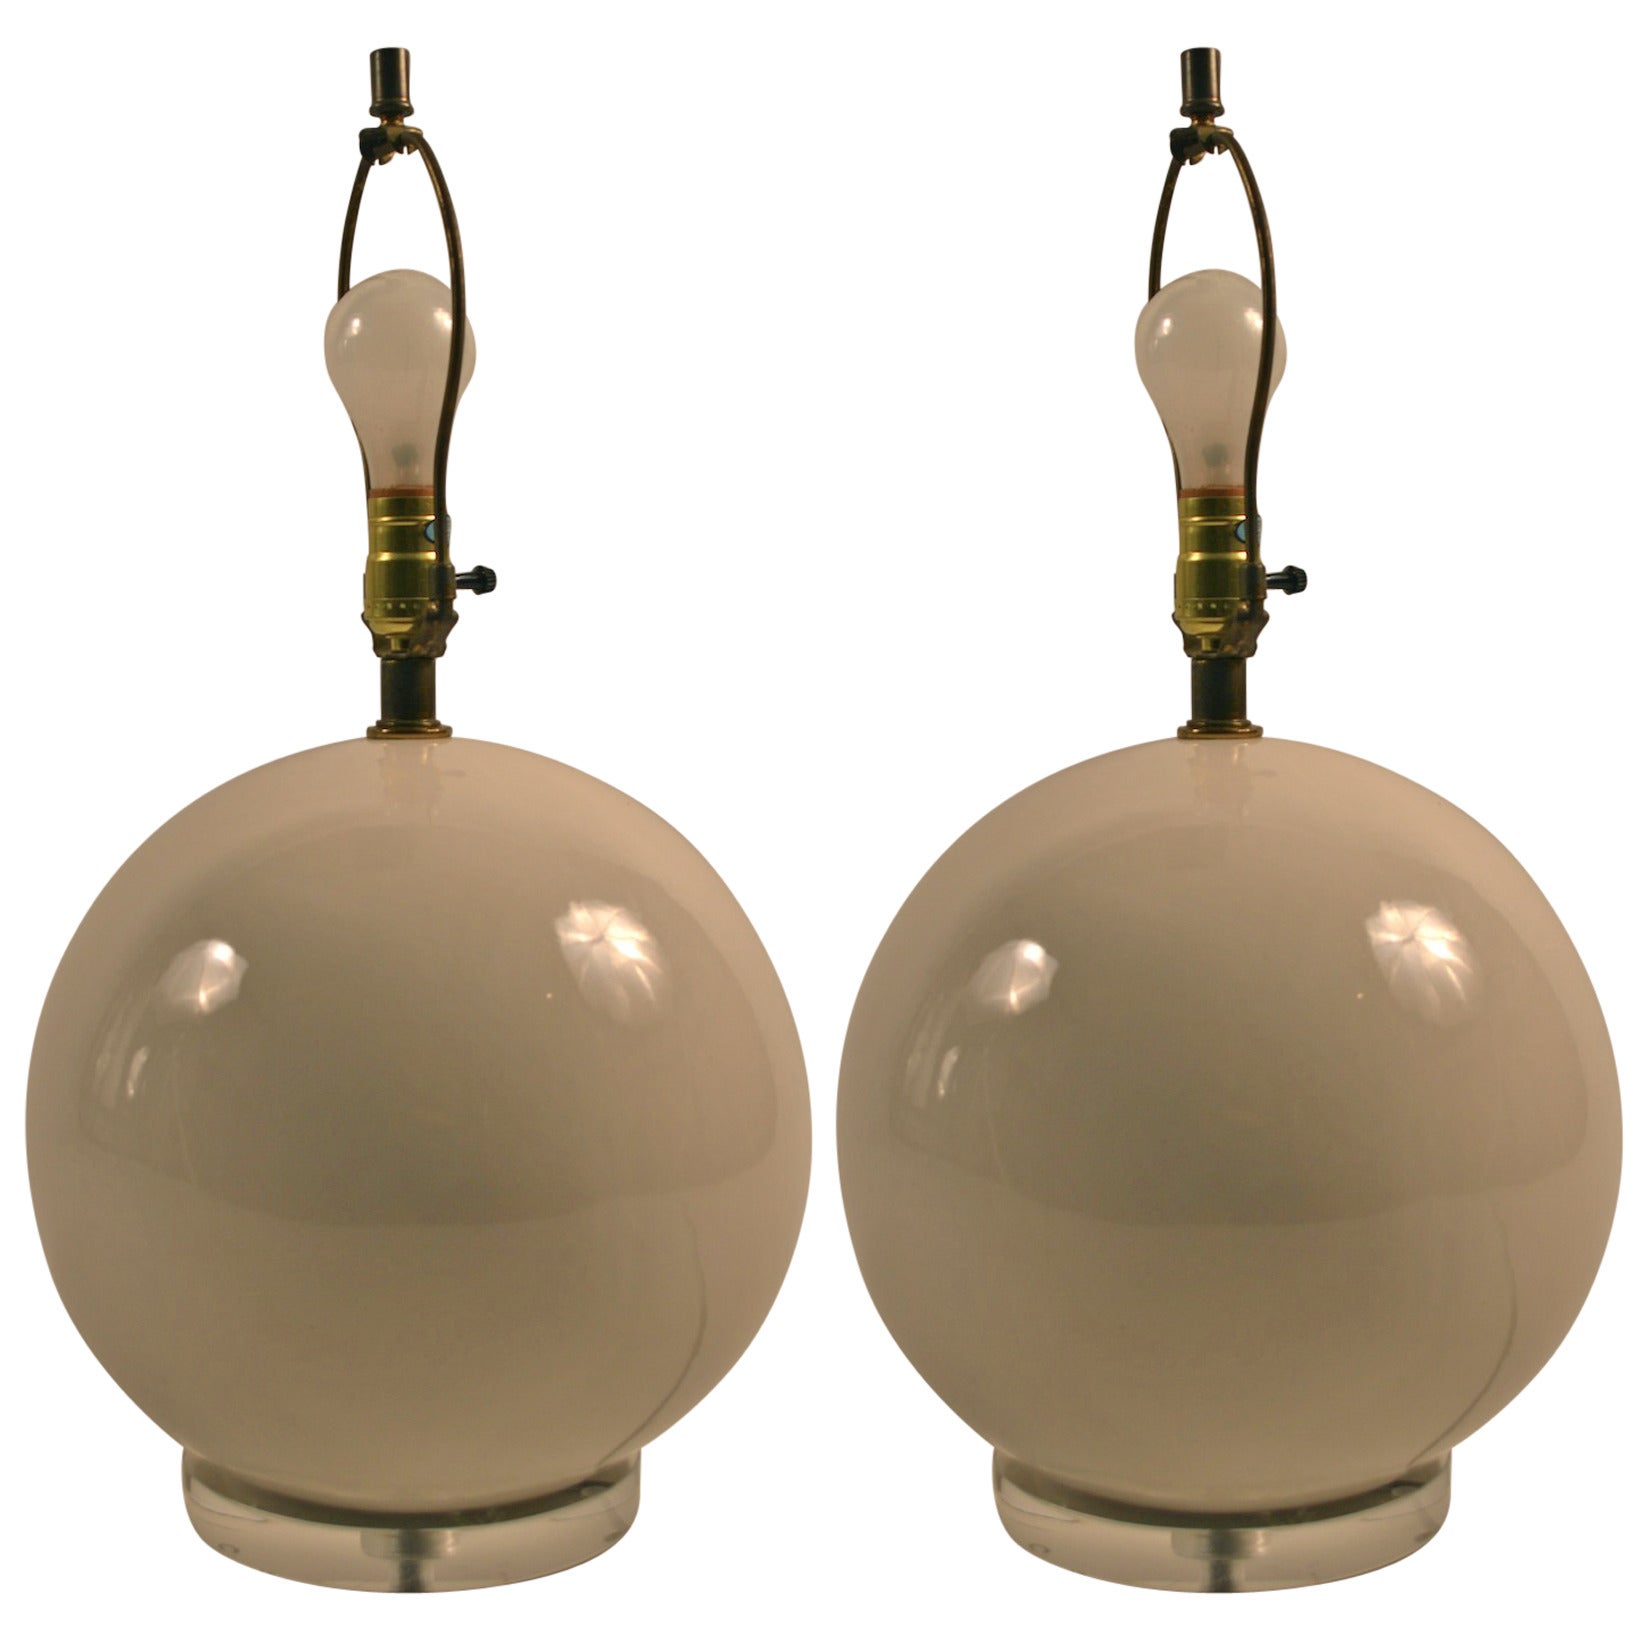 Pair of Ceramic Ball Lamps with Lucite Bases